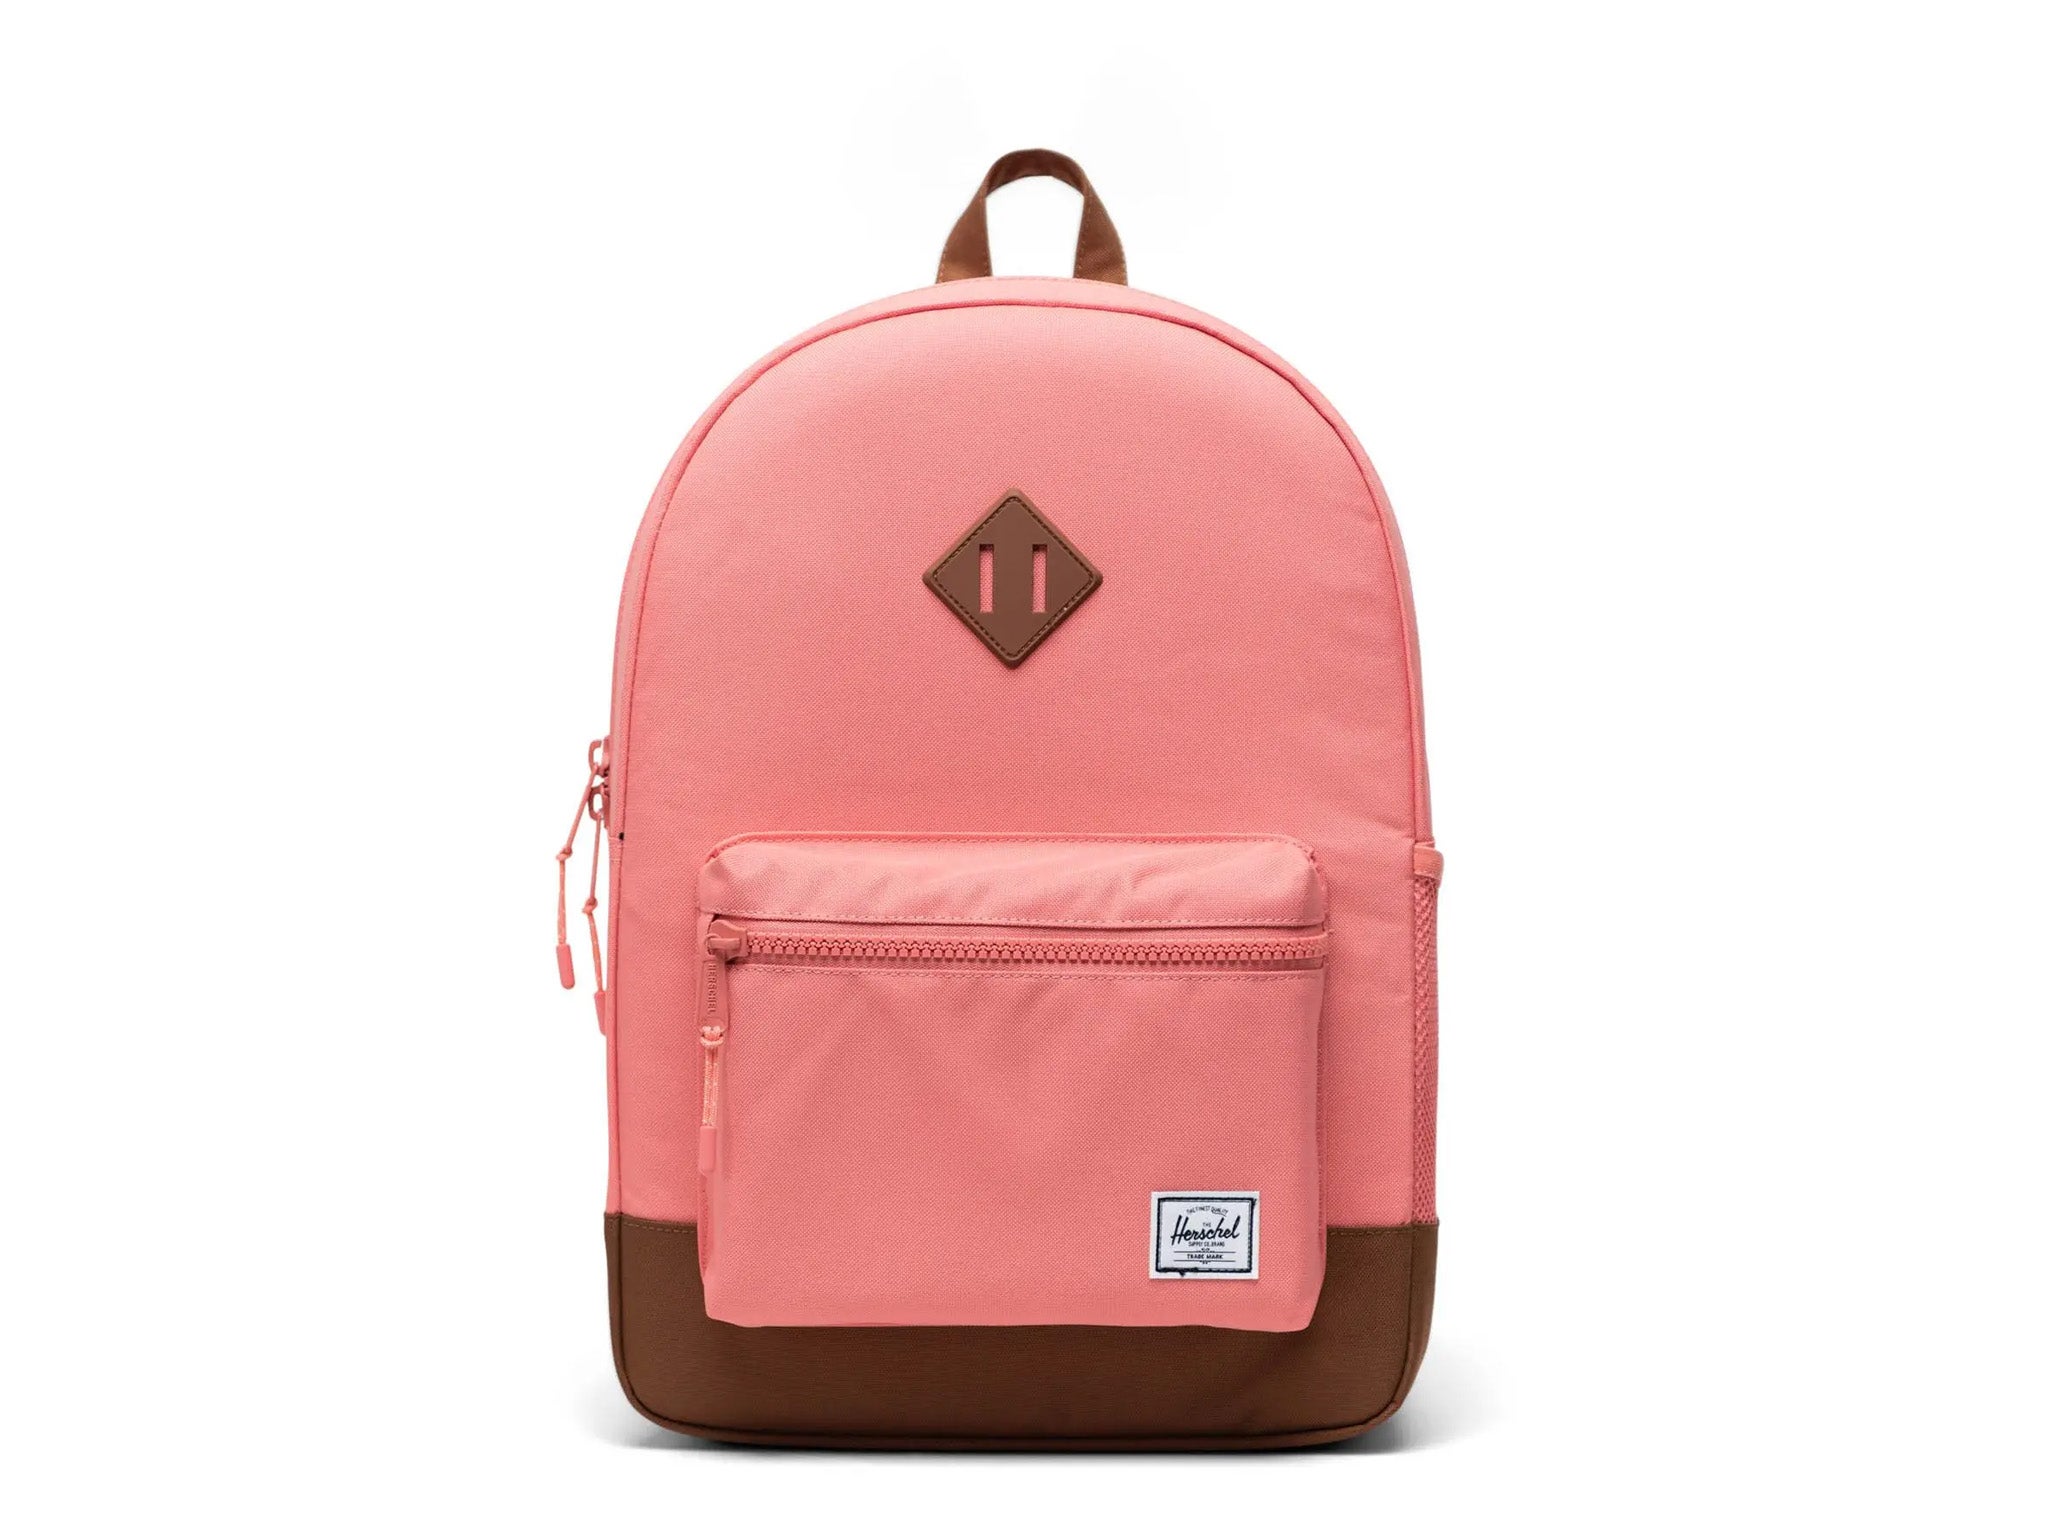 hersh-backpack-Indybest-review